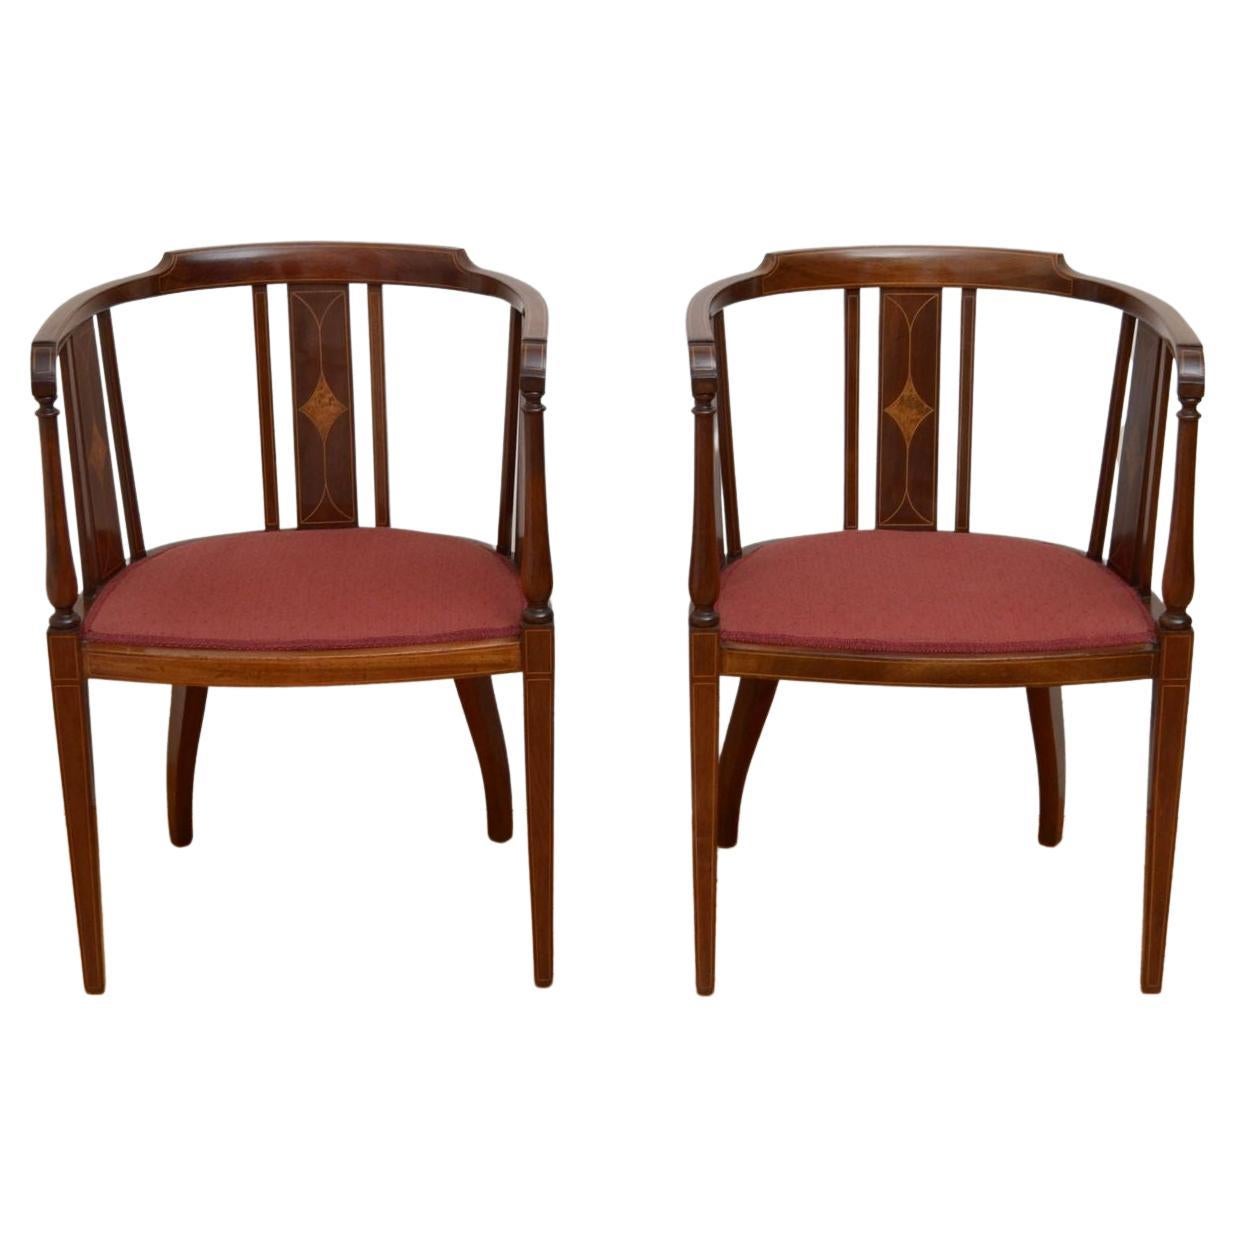 Pair of Edwardian Chairs in Mahogany